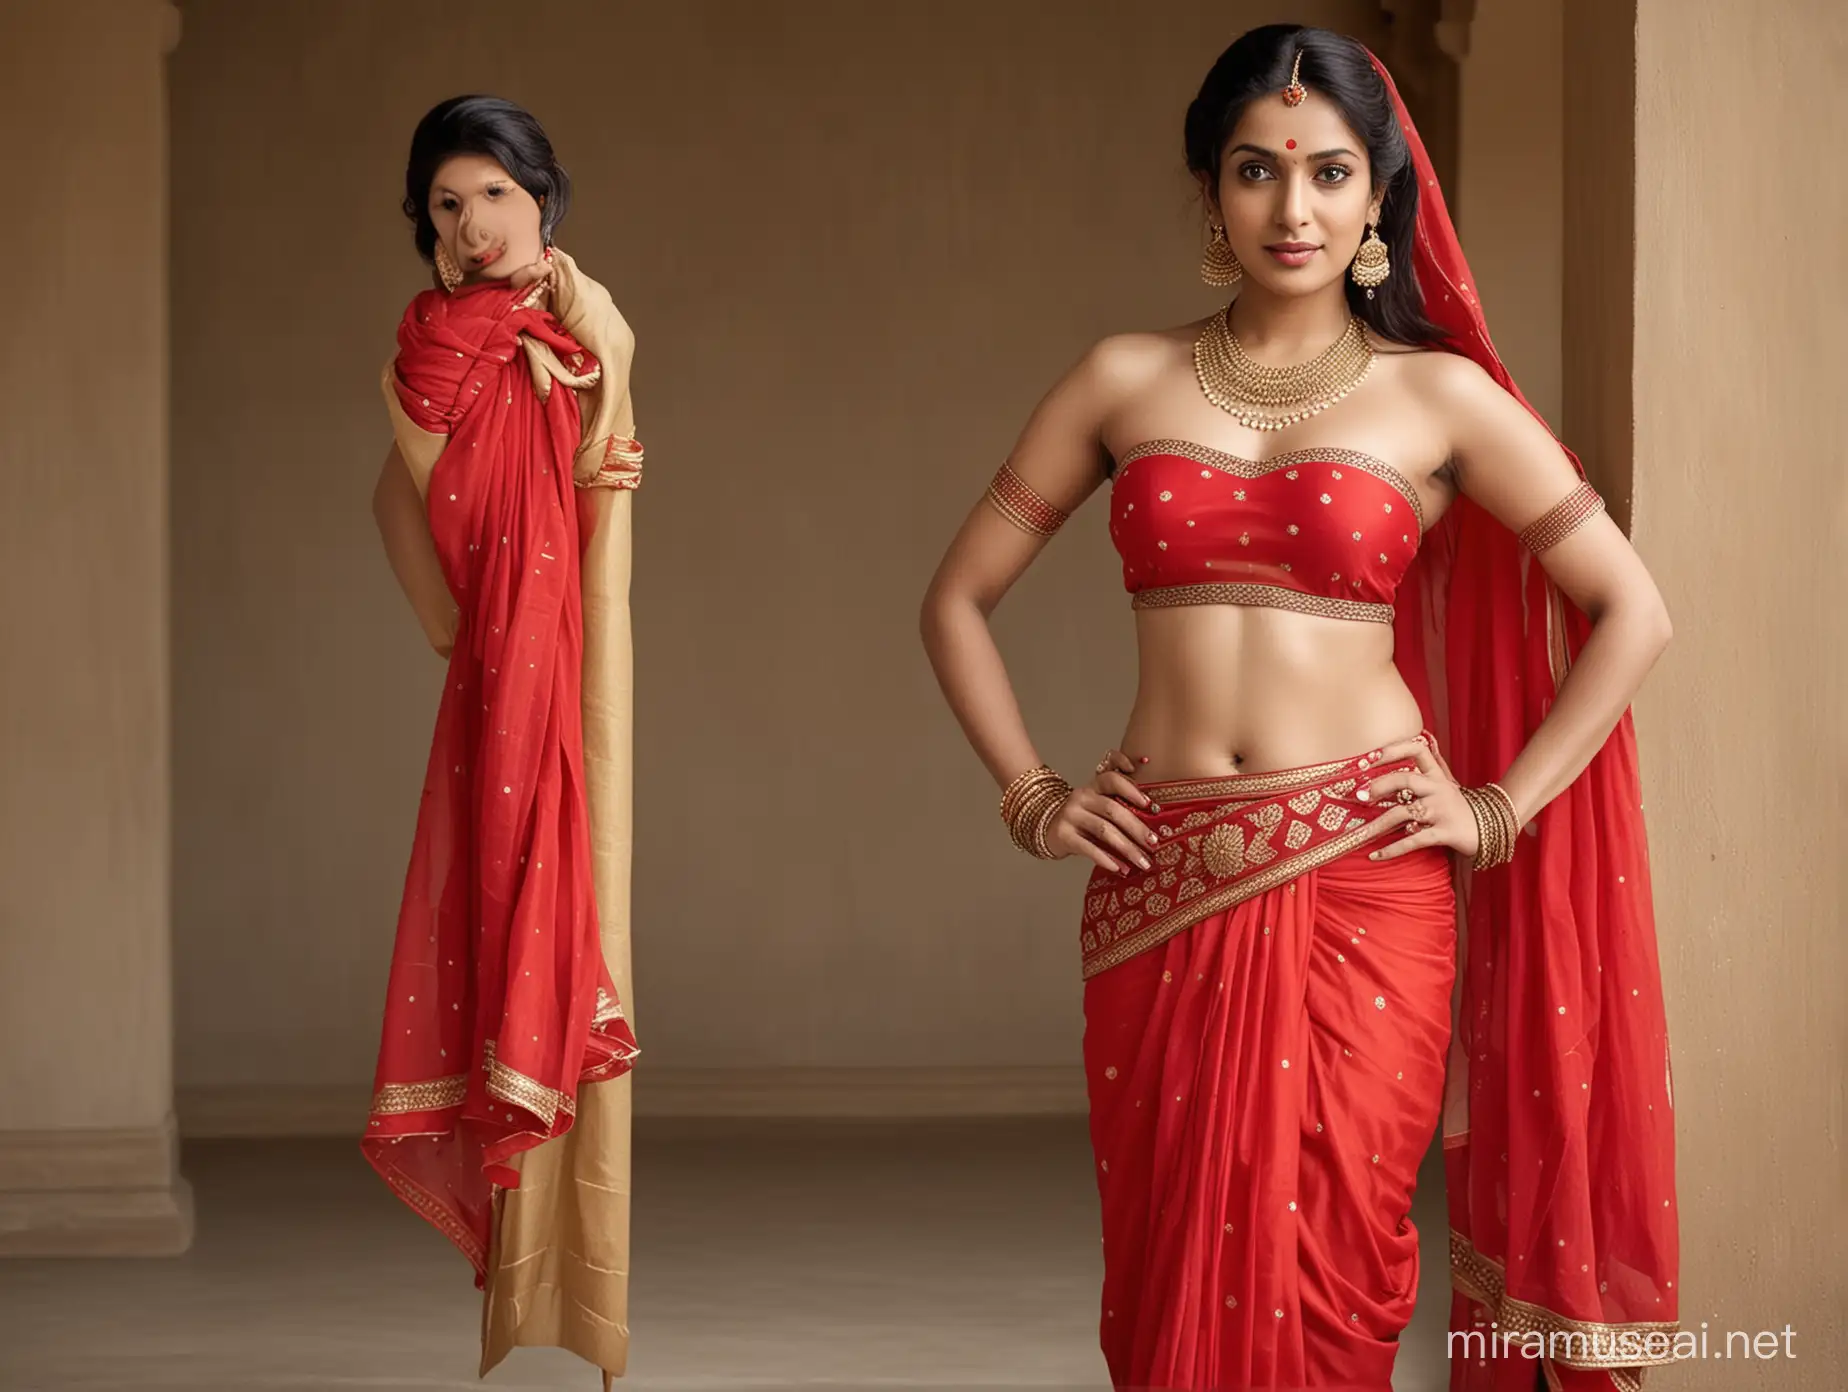 generate an image of Gayatri Bharadwaj wearing traditional bandeau red lingerie and red Indian Sheer dhoti, with appropriate accessories such as bangles and a bindi, while maintaining her recognizable features and elegance.